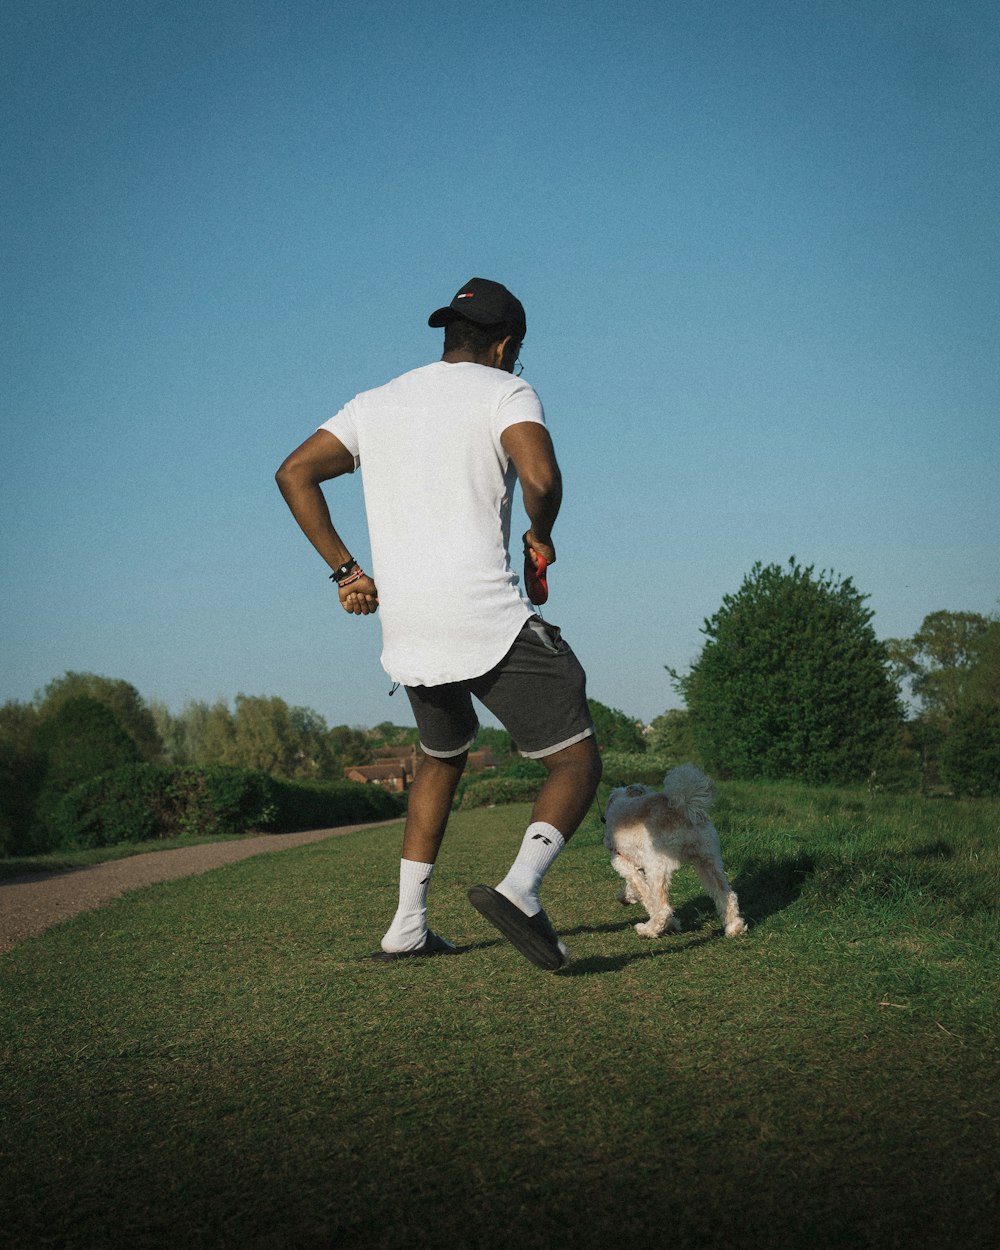 man in white t-shirt and black shorts running on green grass field during daytime